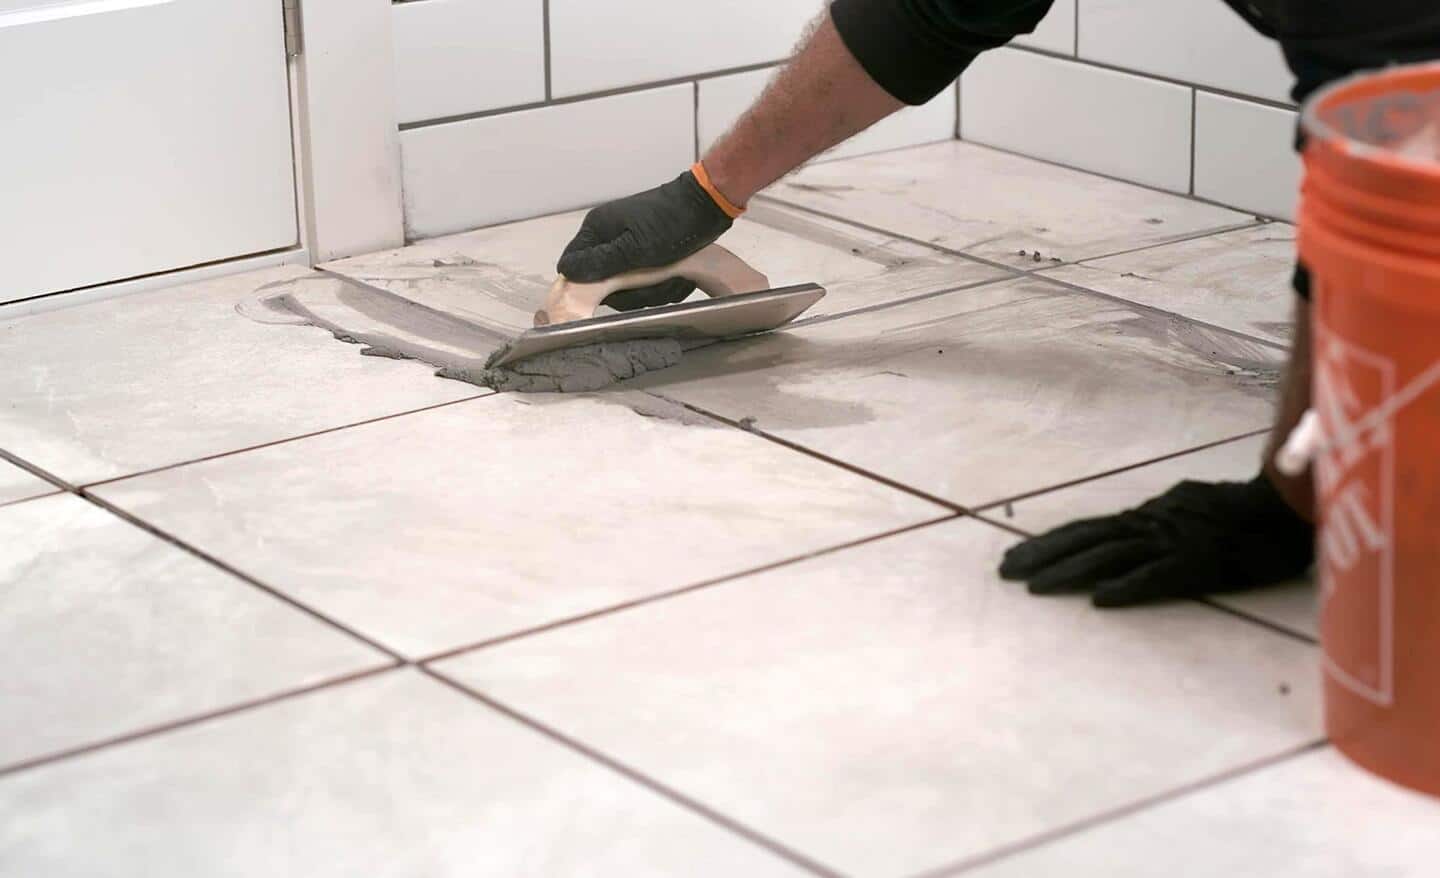 Person applying grout to a tile floor